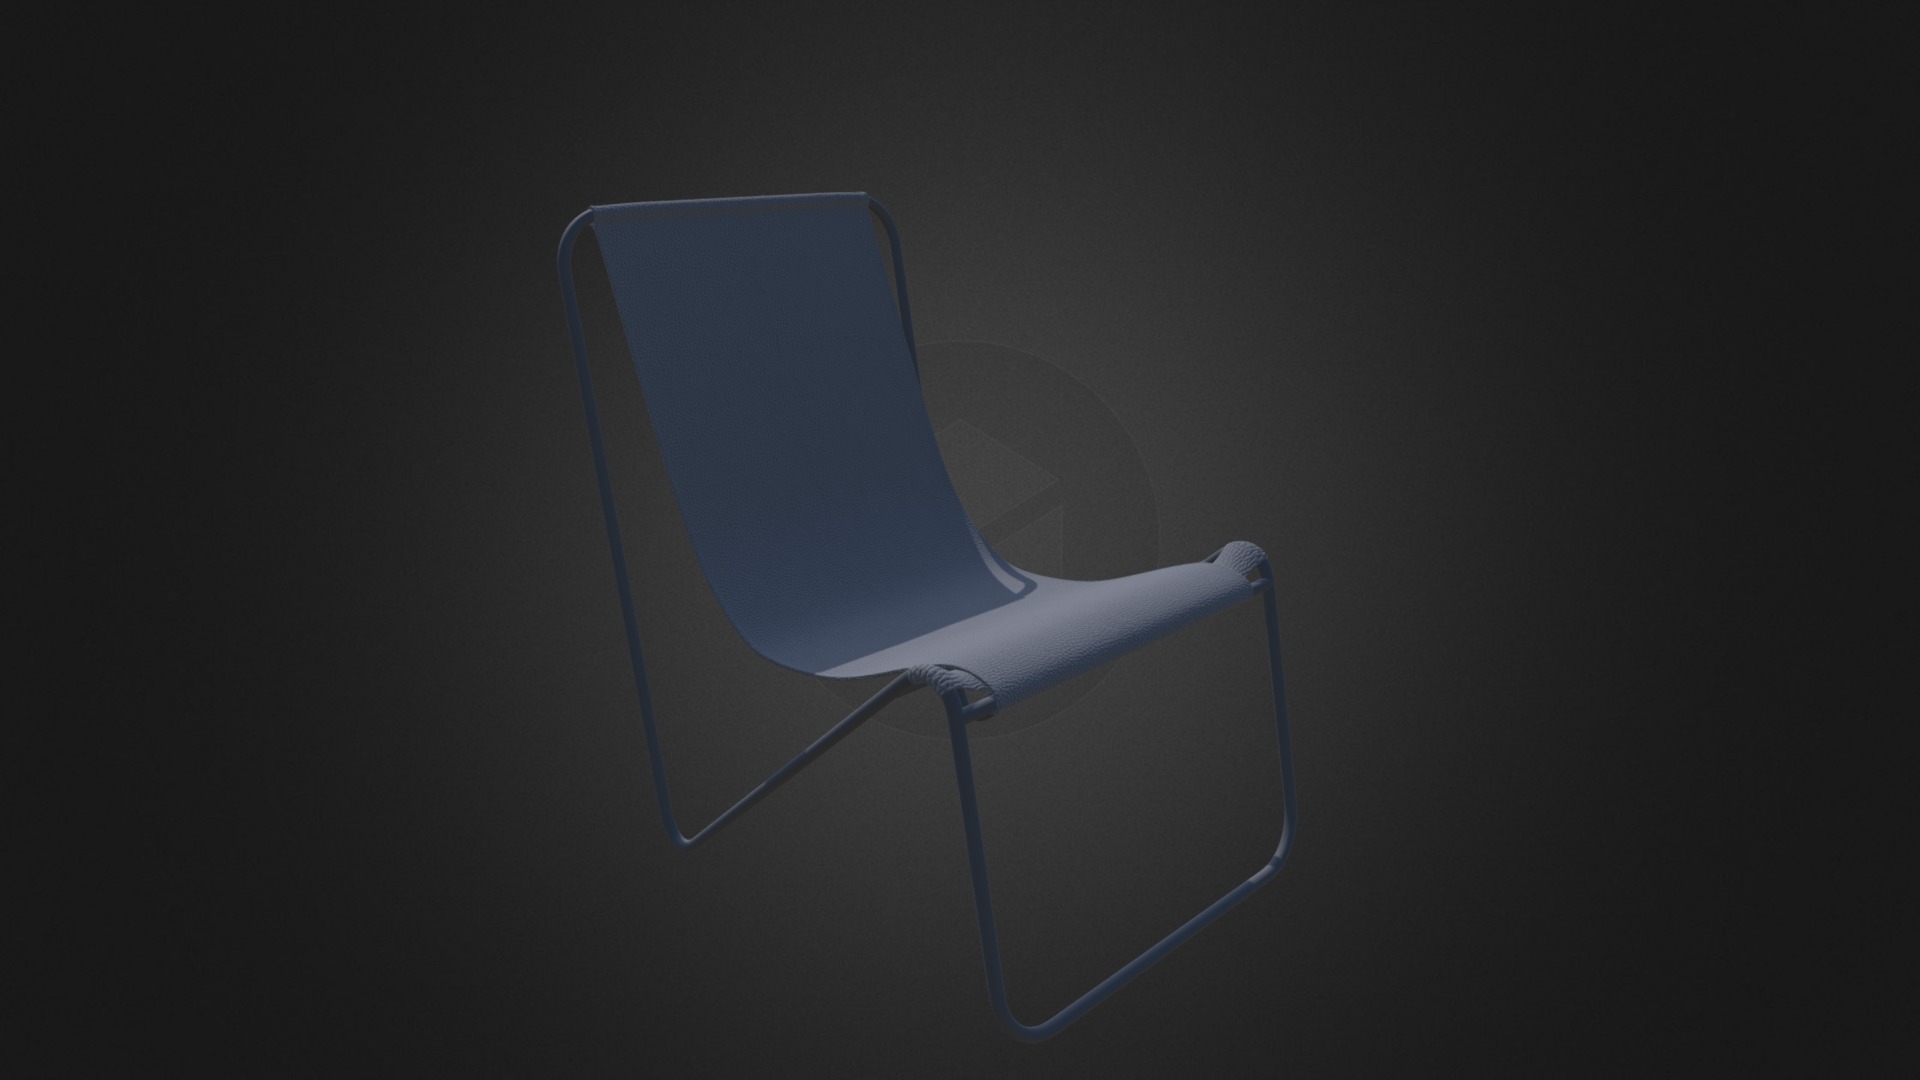 3D model Simple Metal Chair D Model - This is a 3D model of the Simple Metal Chair D Model. The 3D model is about a chair with a blue cover.